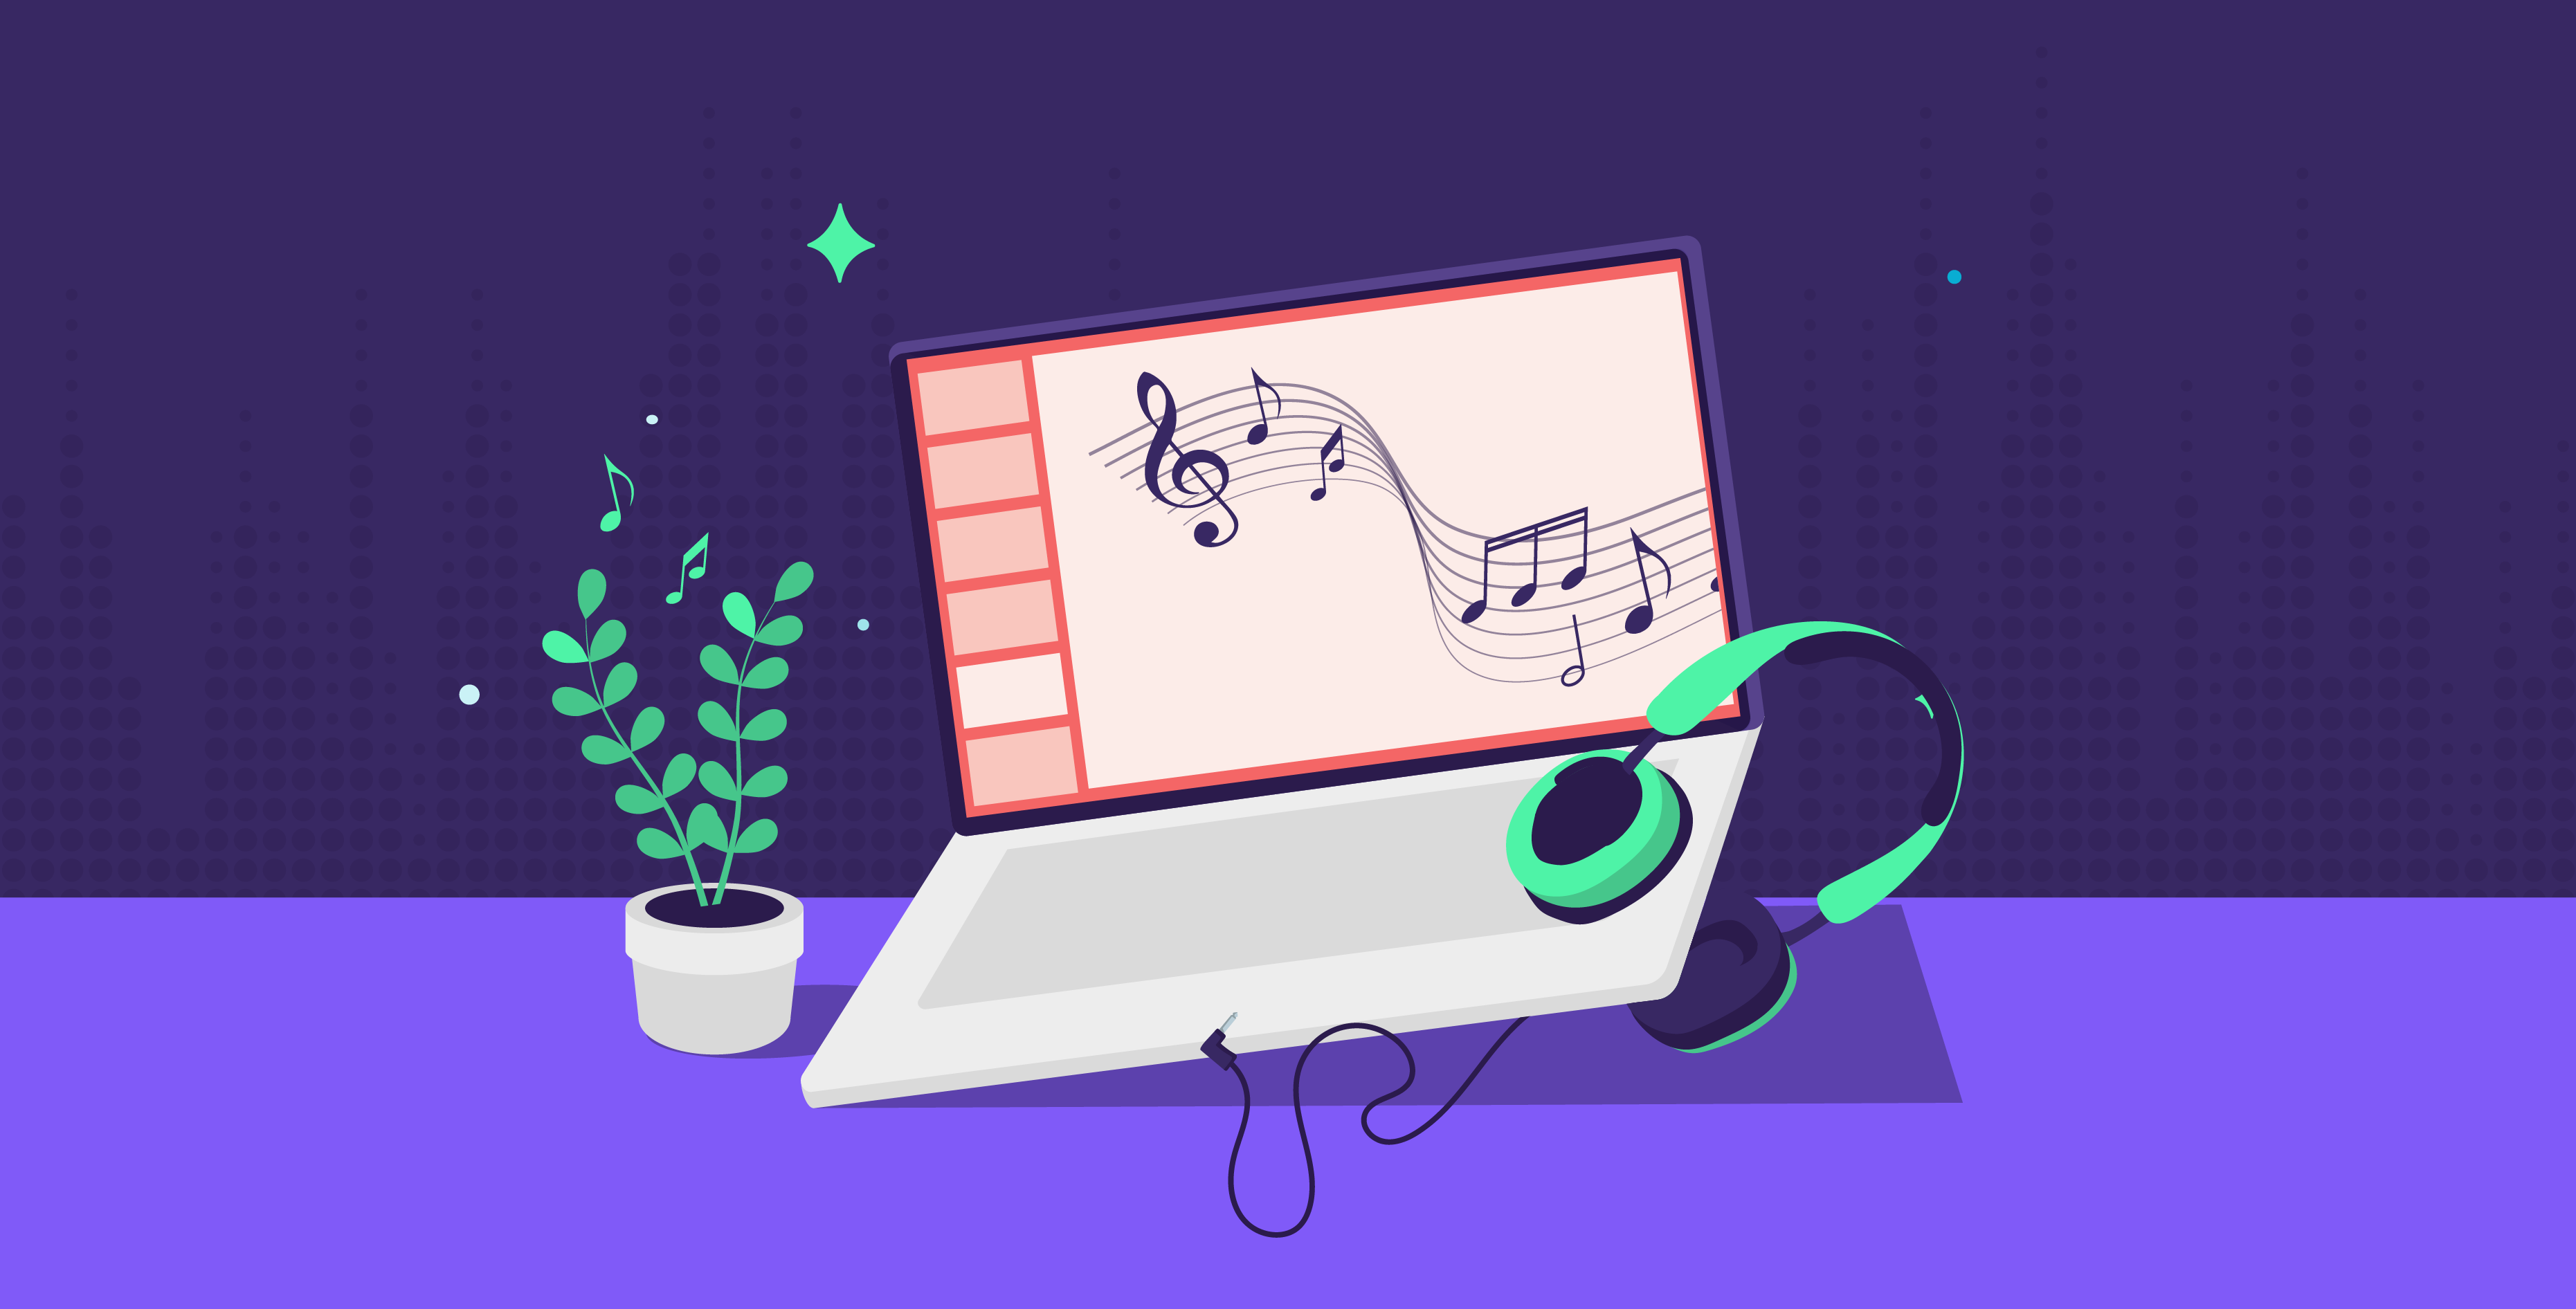 How to add sound and music to a presentation